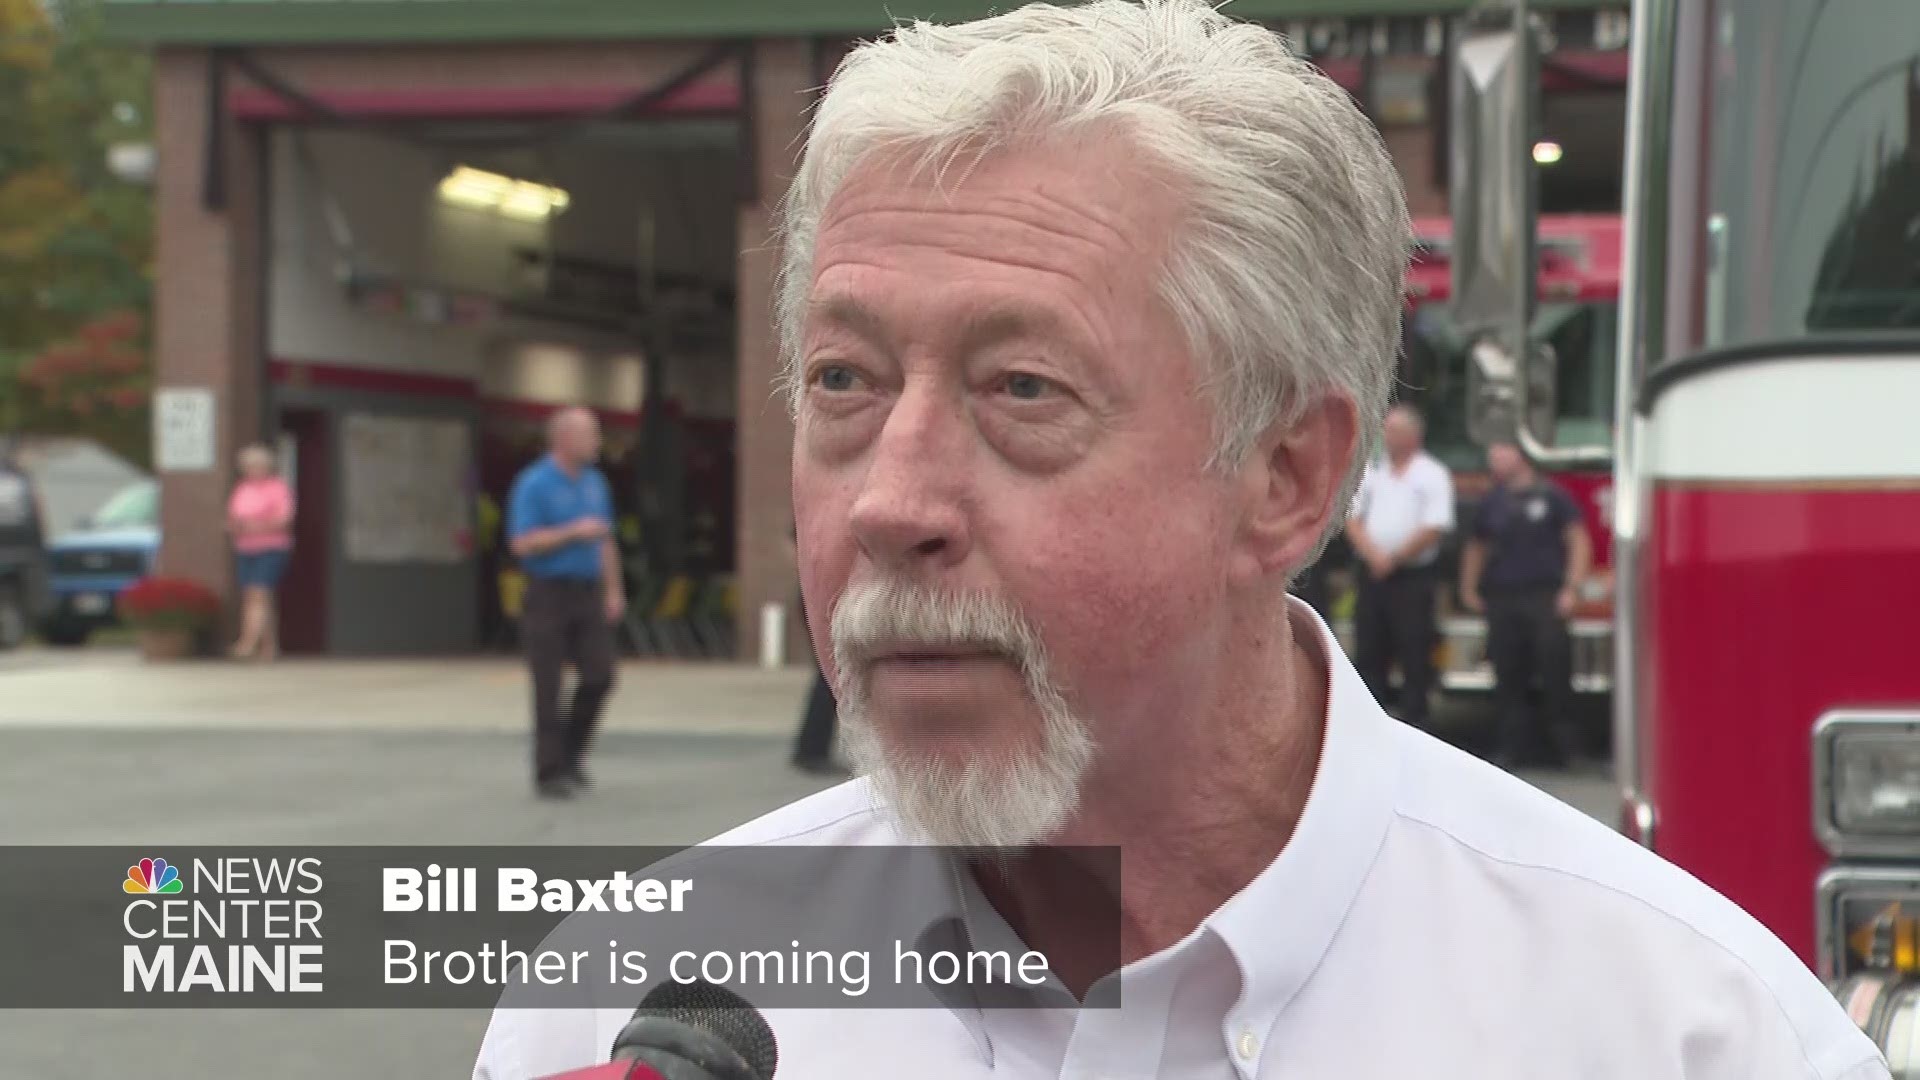 With his brother coming home from the hospital following the LEAP community building explosion, Baxter extends his profound thanks to the community.